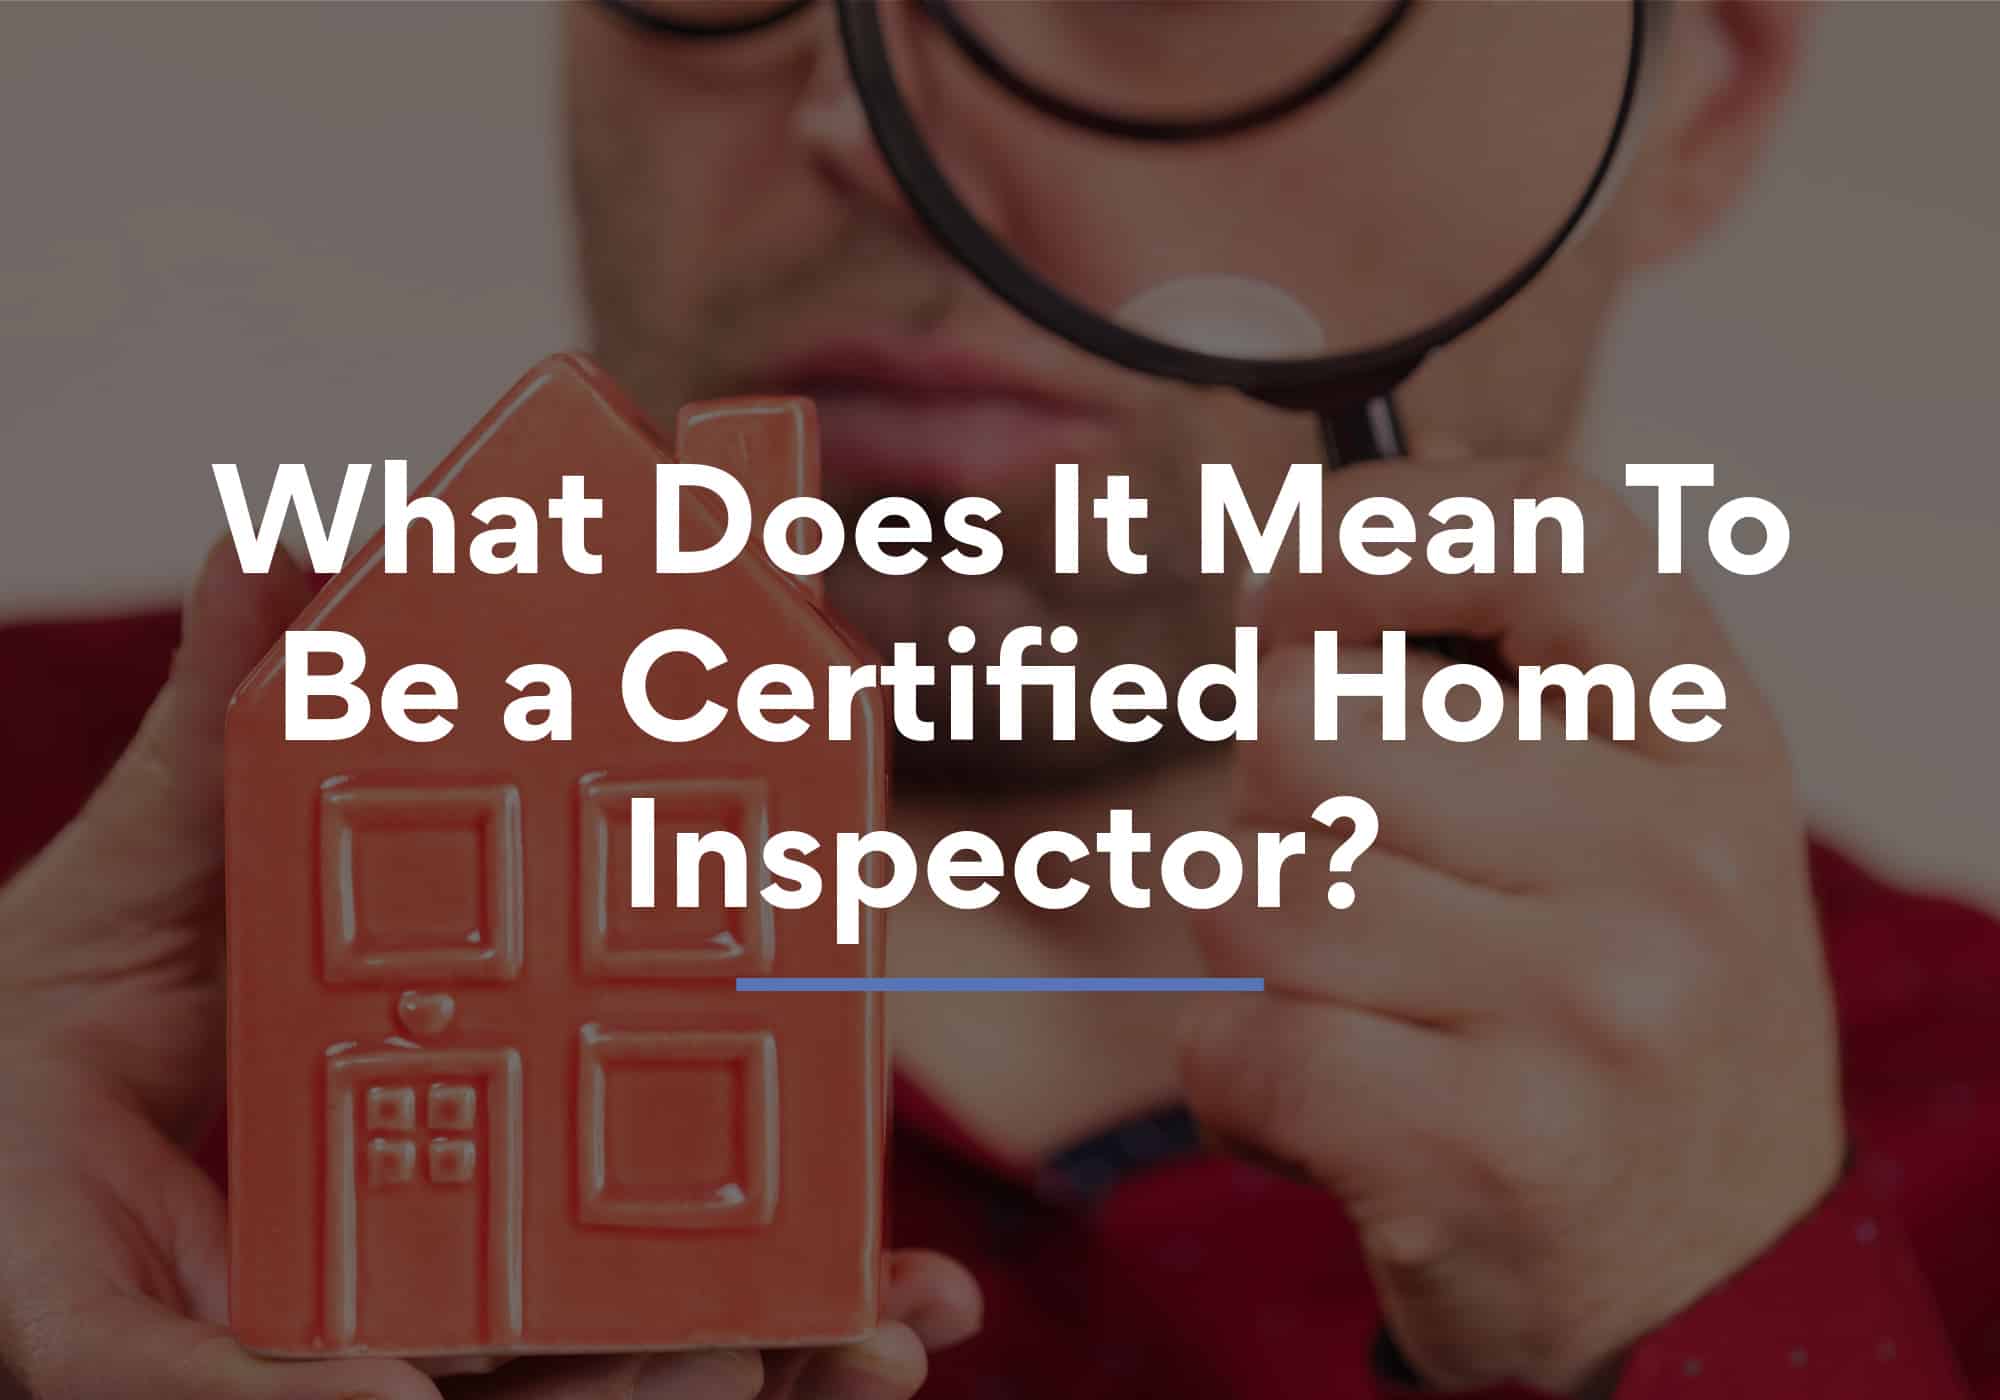 What Does It Mean To Be a Certified Home Inspector?